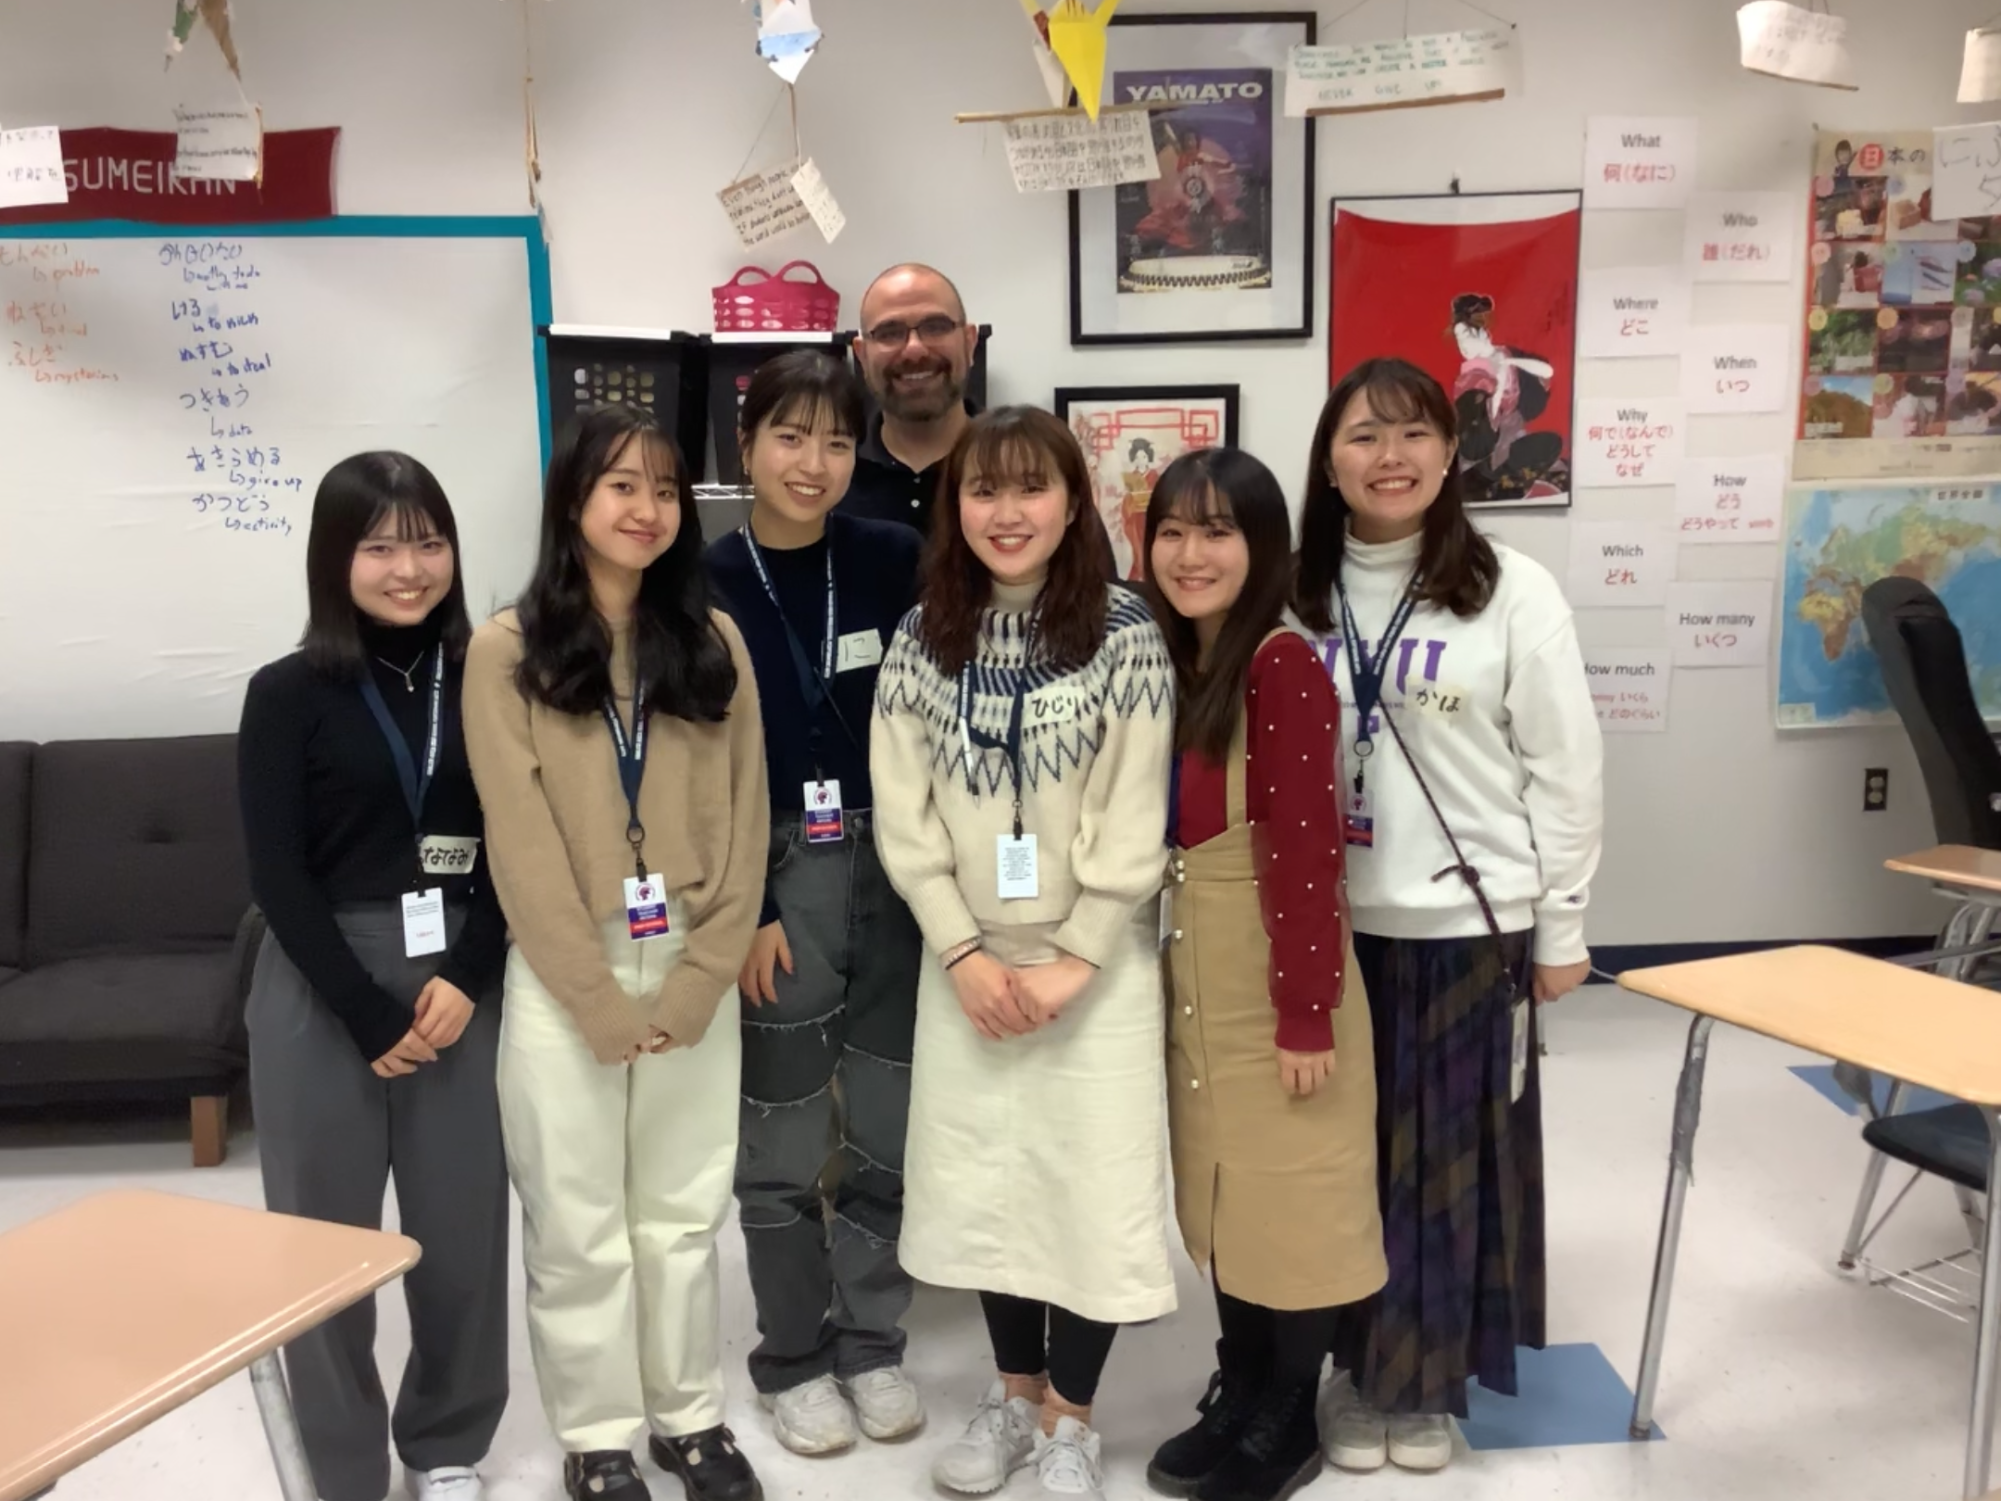 Mr. Balsomico and the visiting college students from Japan